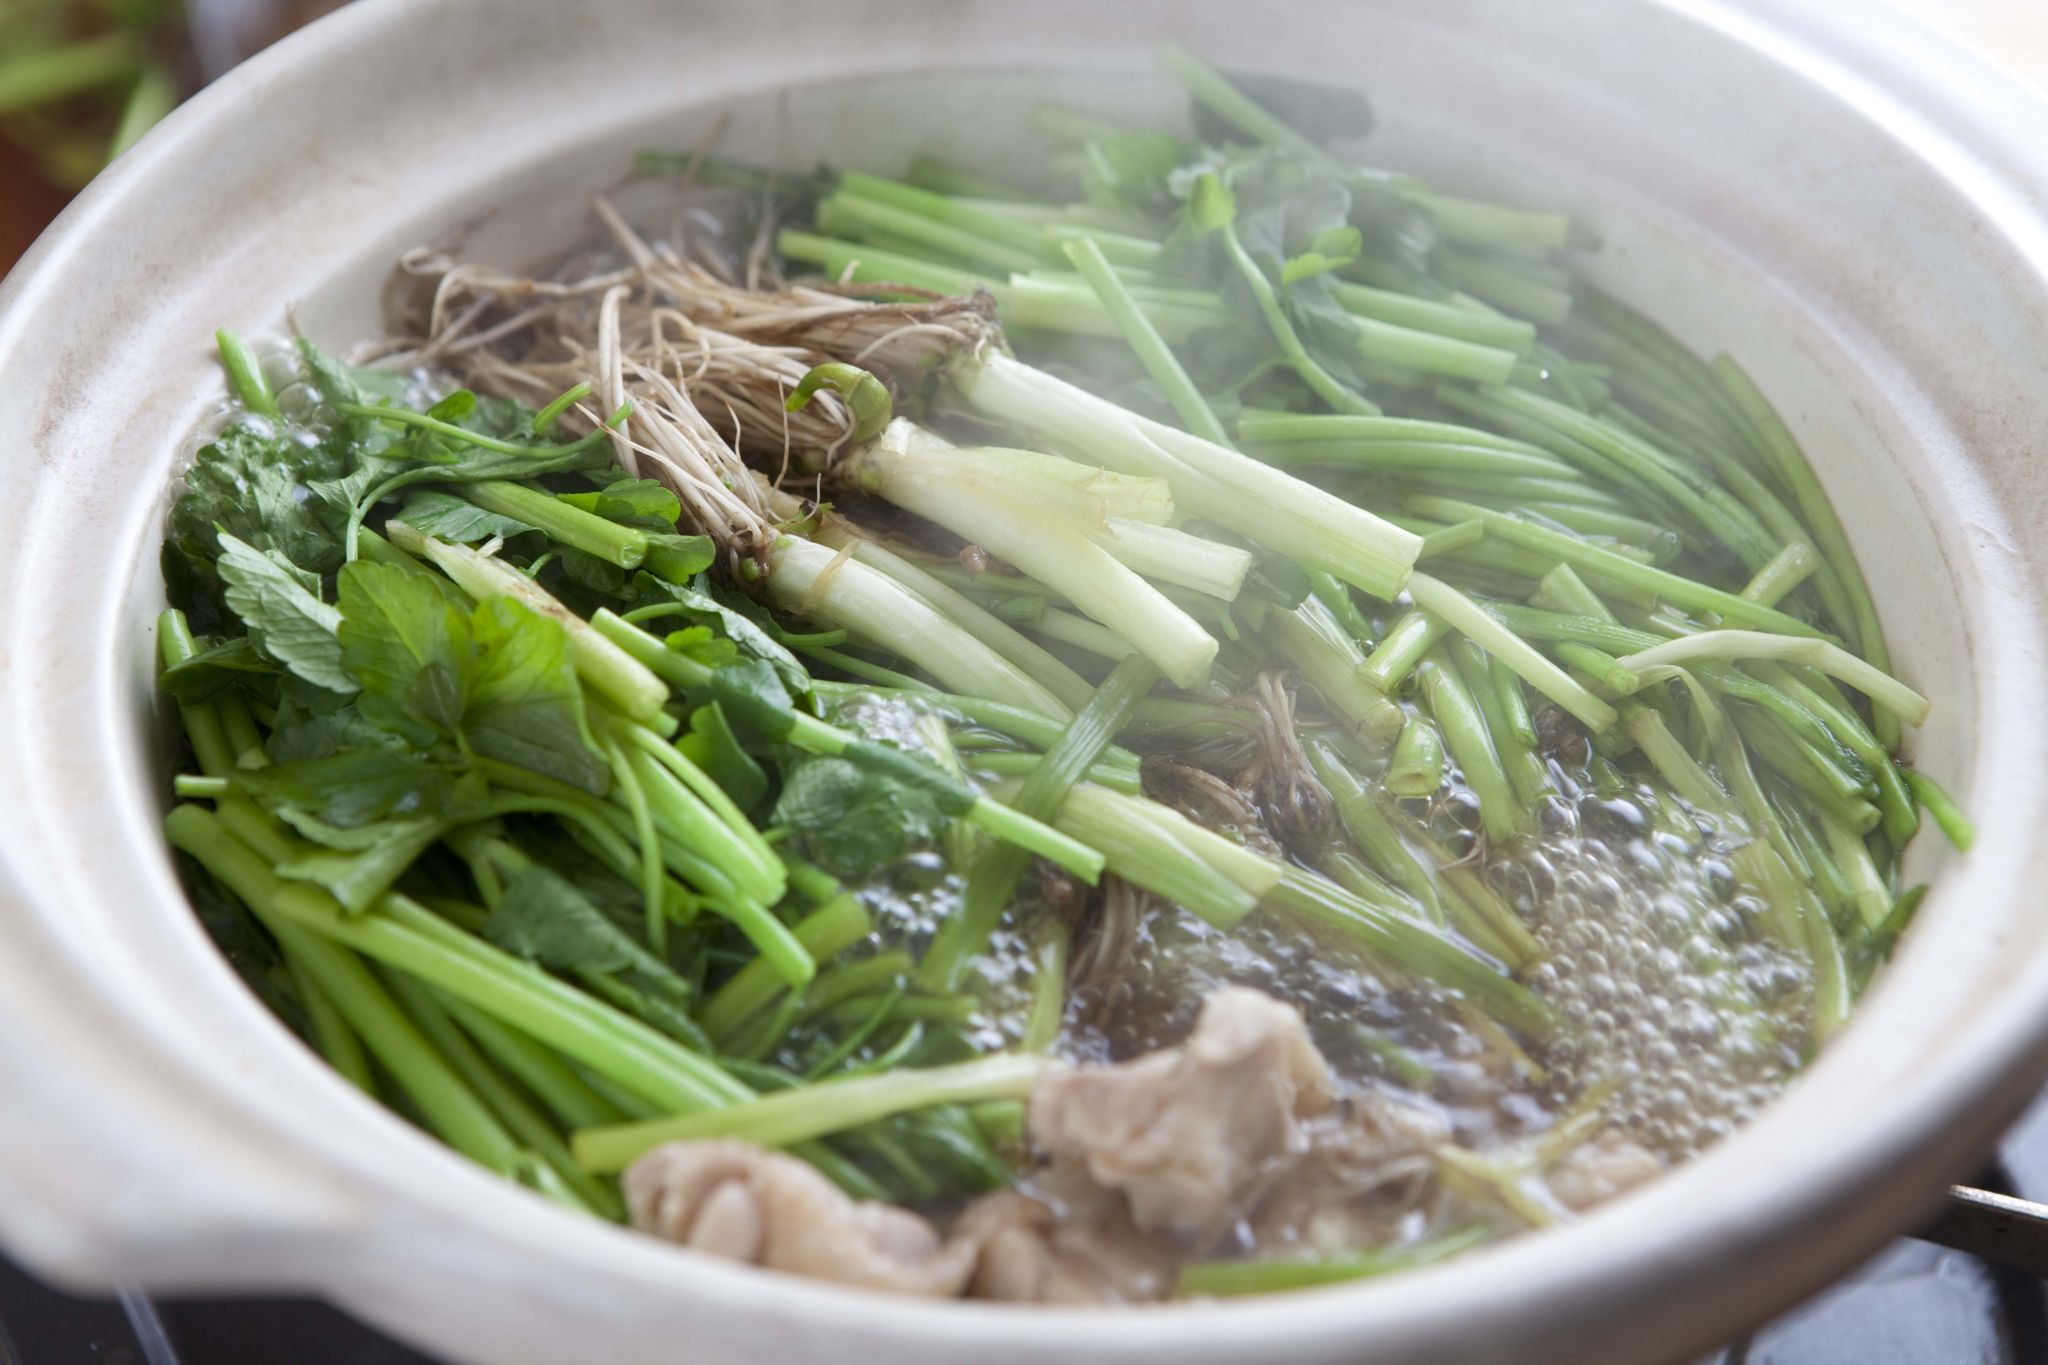 Seri nabe - a Japanese style hotpot stew cooked with parsley